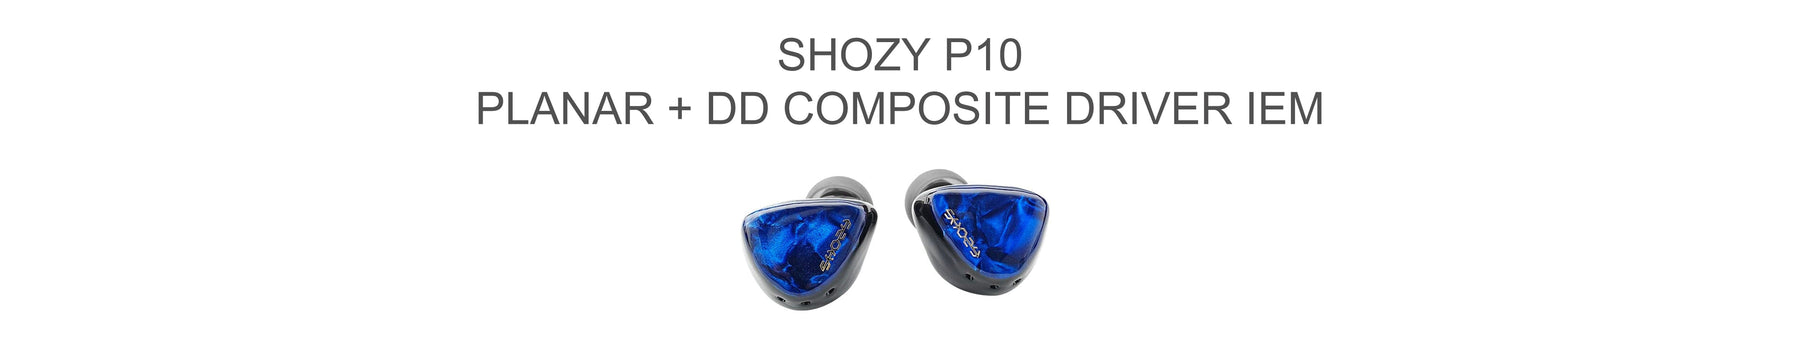 Shozy P10 Planar+DD Composite Driver IEMs With Tri-Vent Dampening Structure